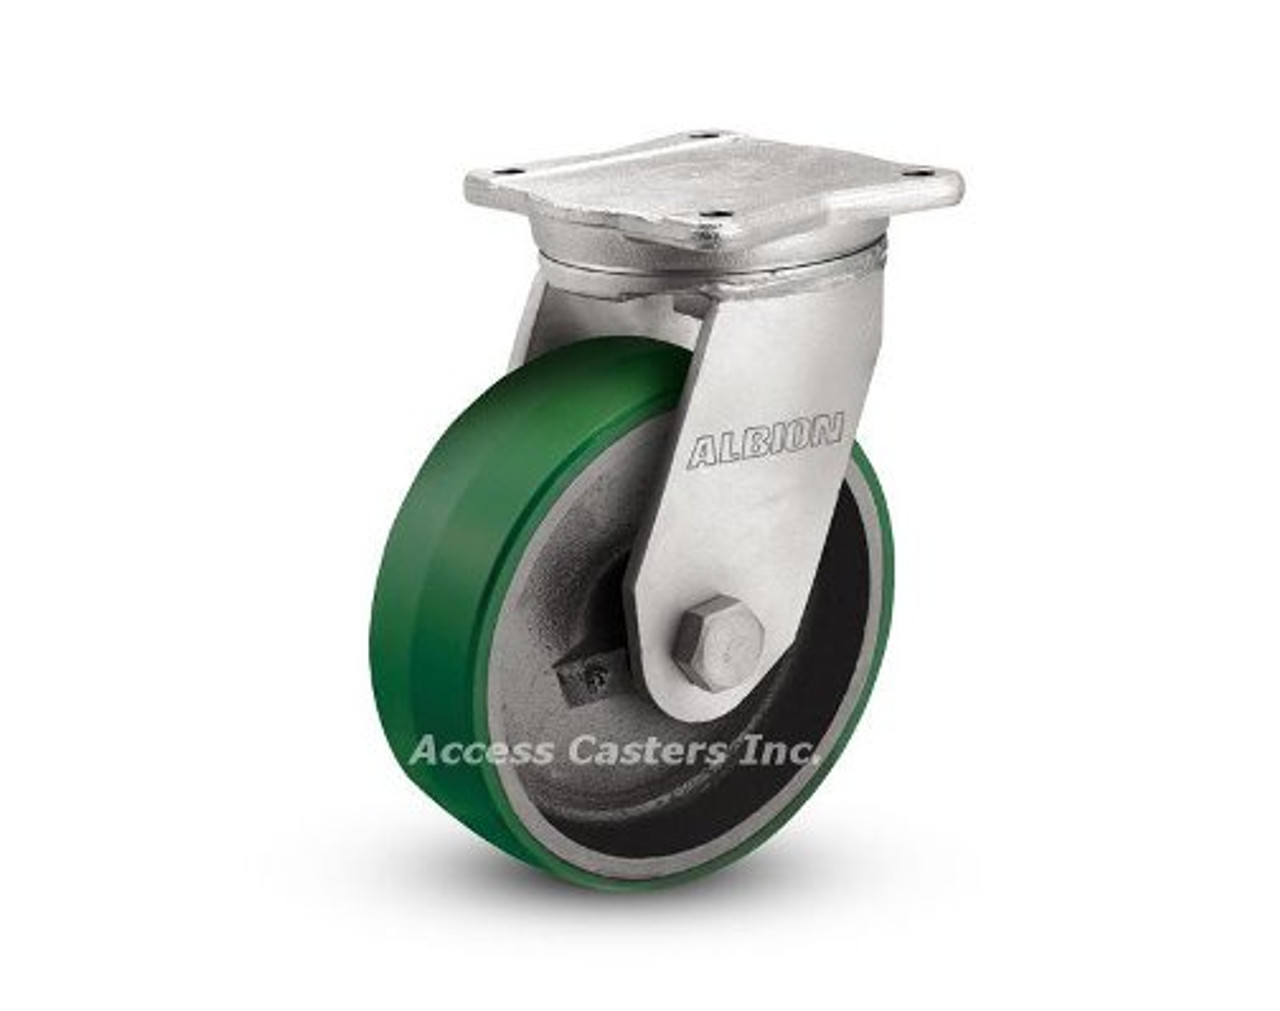 Picture shows caster with 10 Inch wheel.